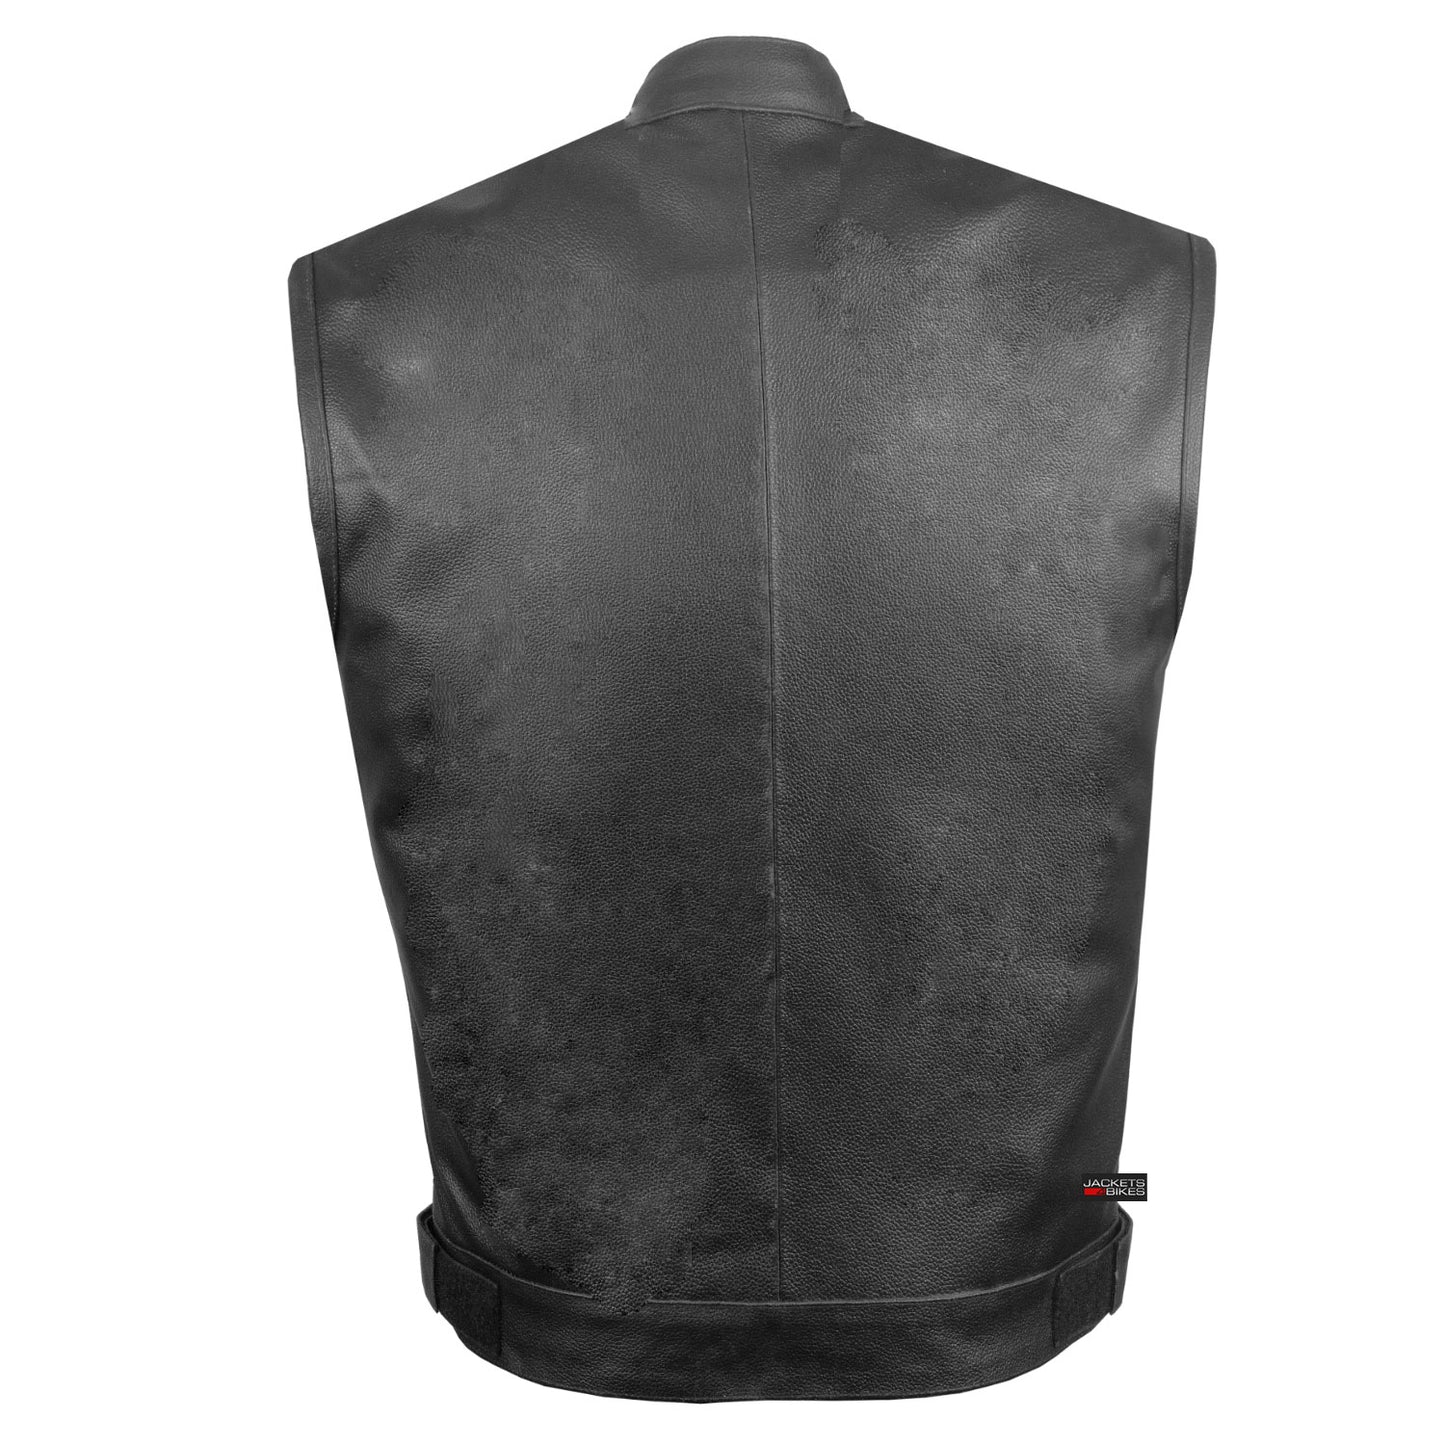 Men's ARMOR Leather SOA Anarchy Motorcycle Biker Club Concealed Carry Vest